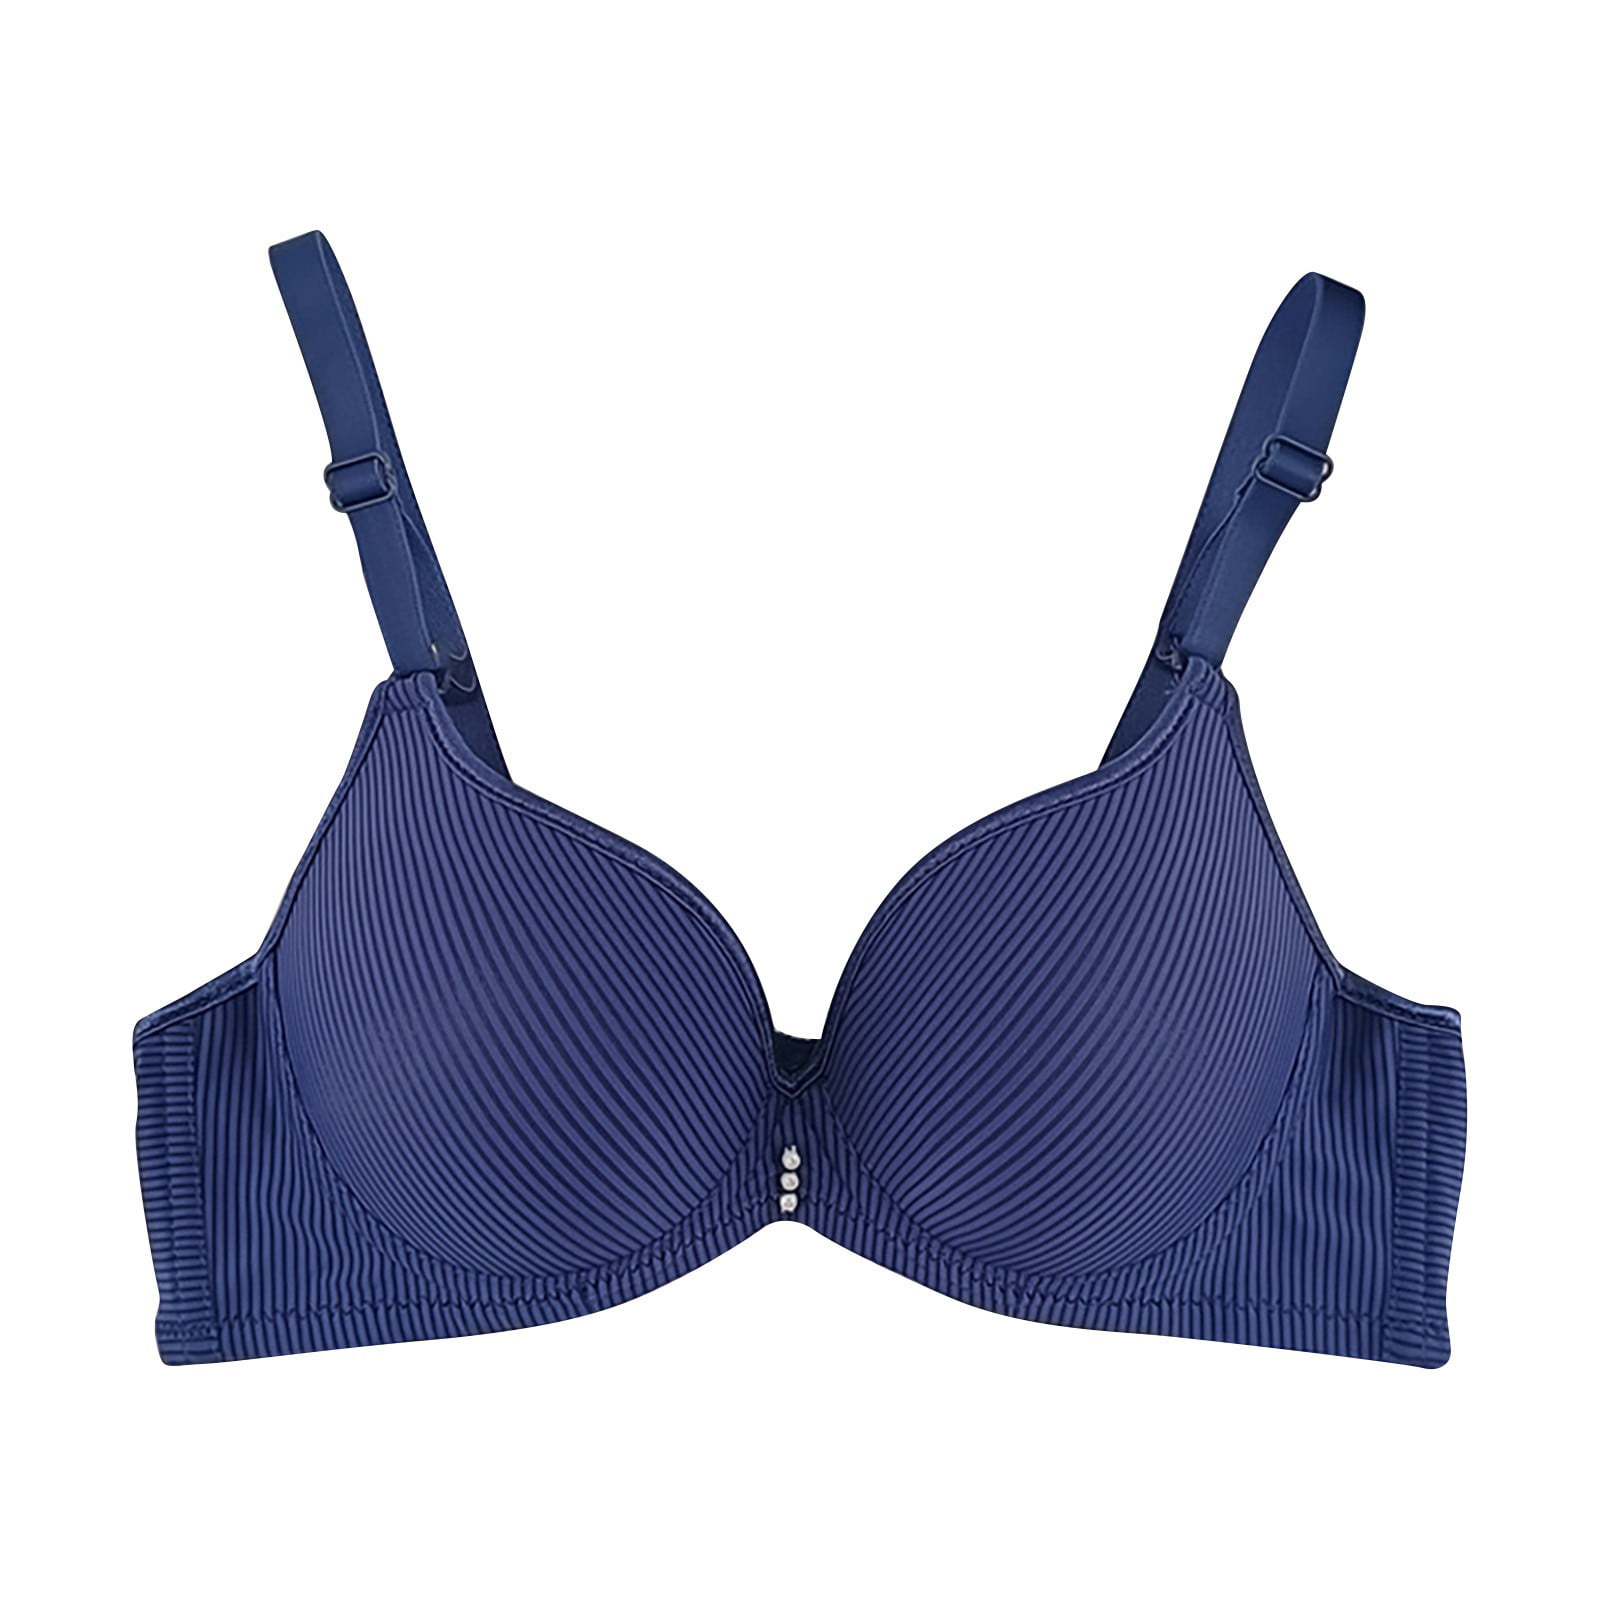 30D 65D / 32C 70C Bra in Stock Gift for Wife Blue Lace Bra Gift